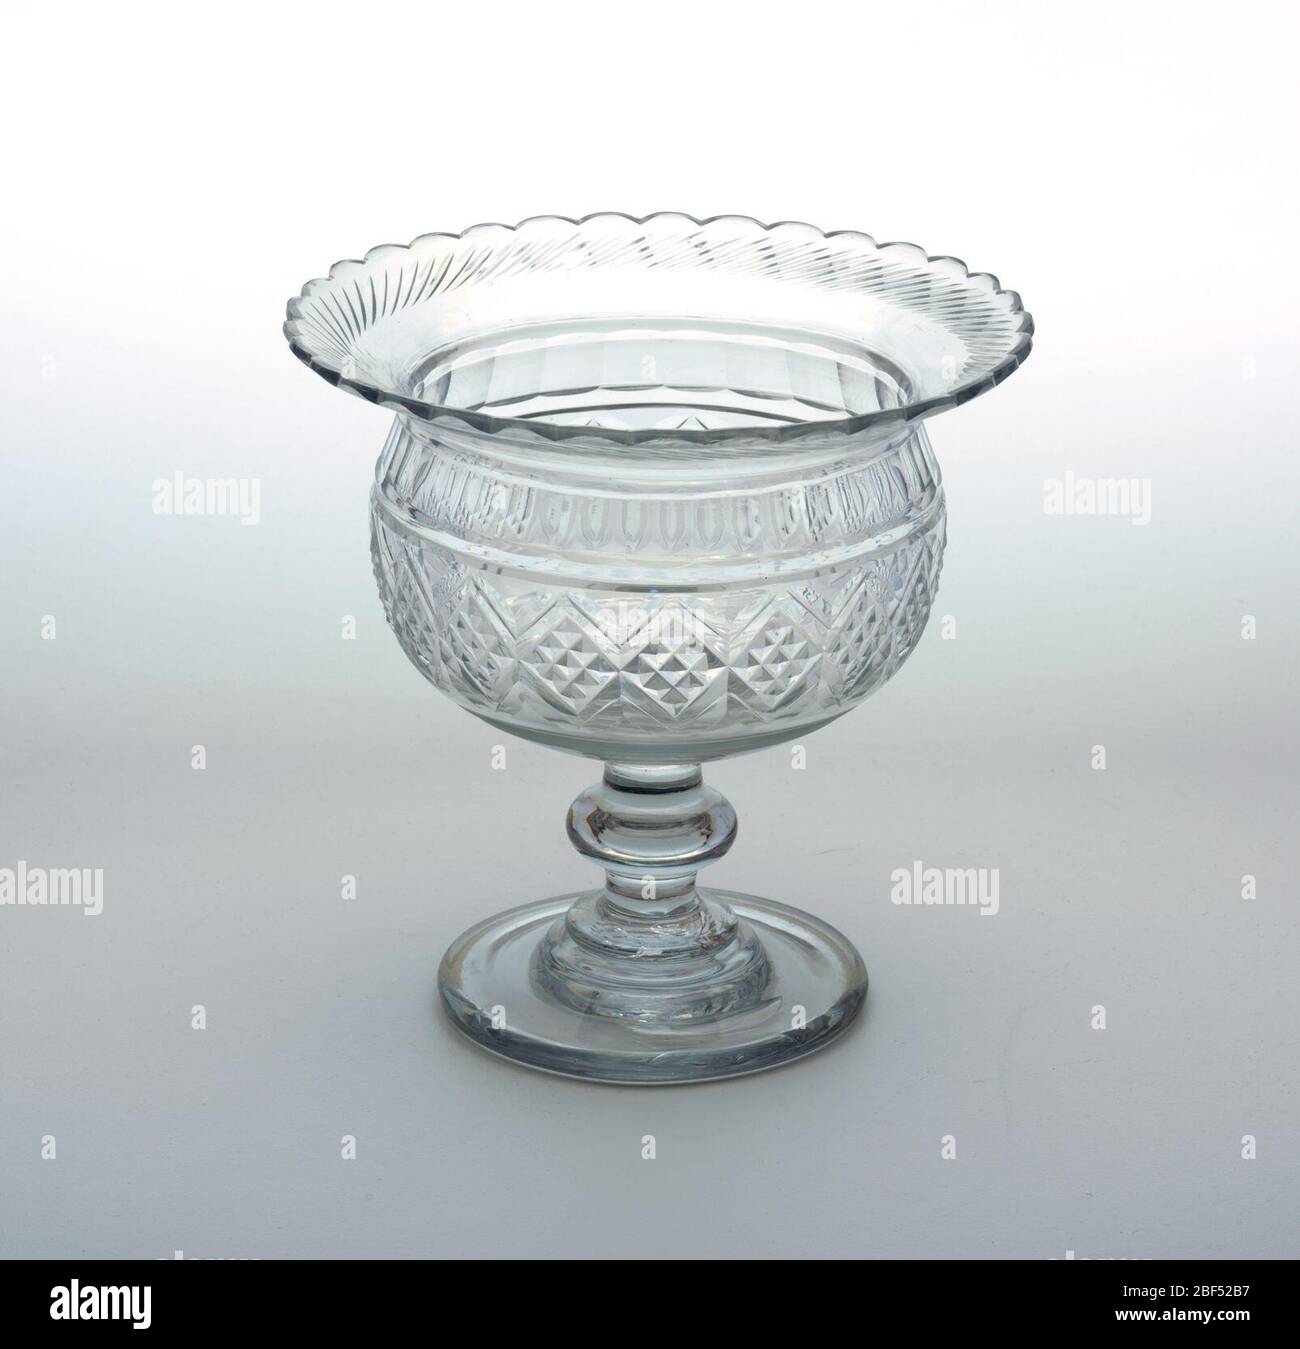 Bowl. Spherical bowl with wide flaring rim. Stem with flattened knop and stepped circular base. Top rim has scalloped edge and row of cut blazes. Stock Photo